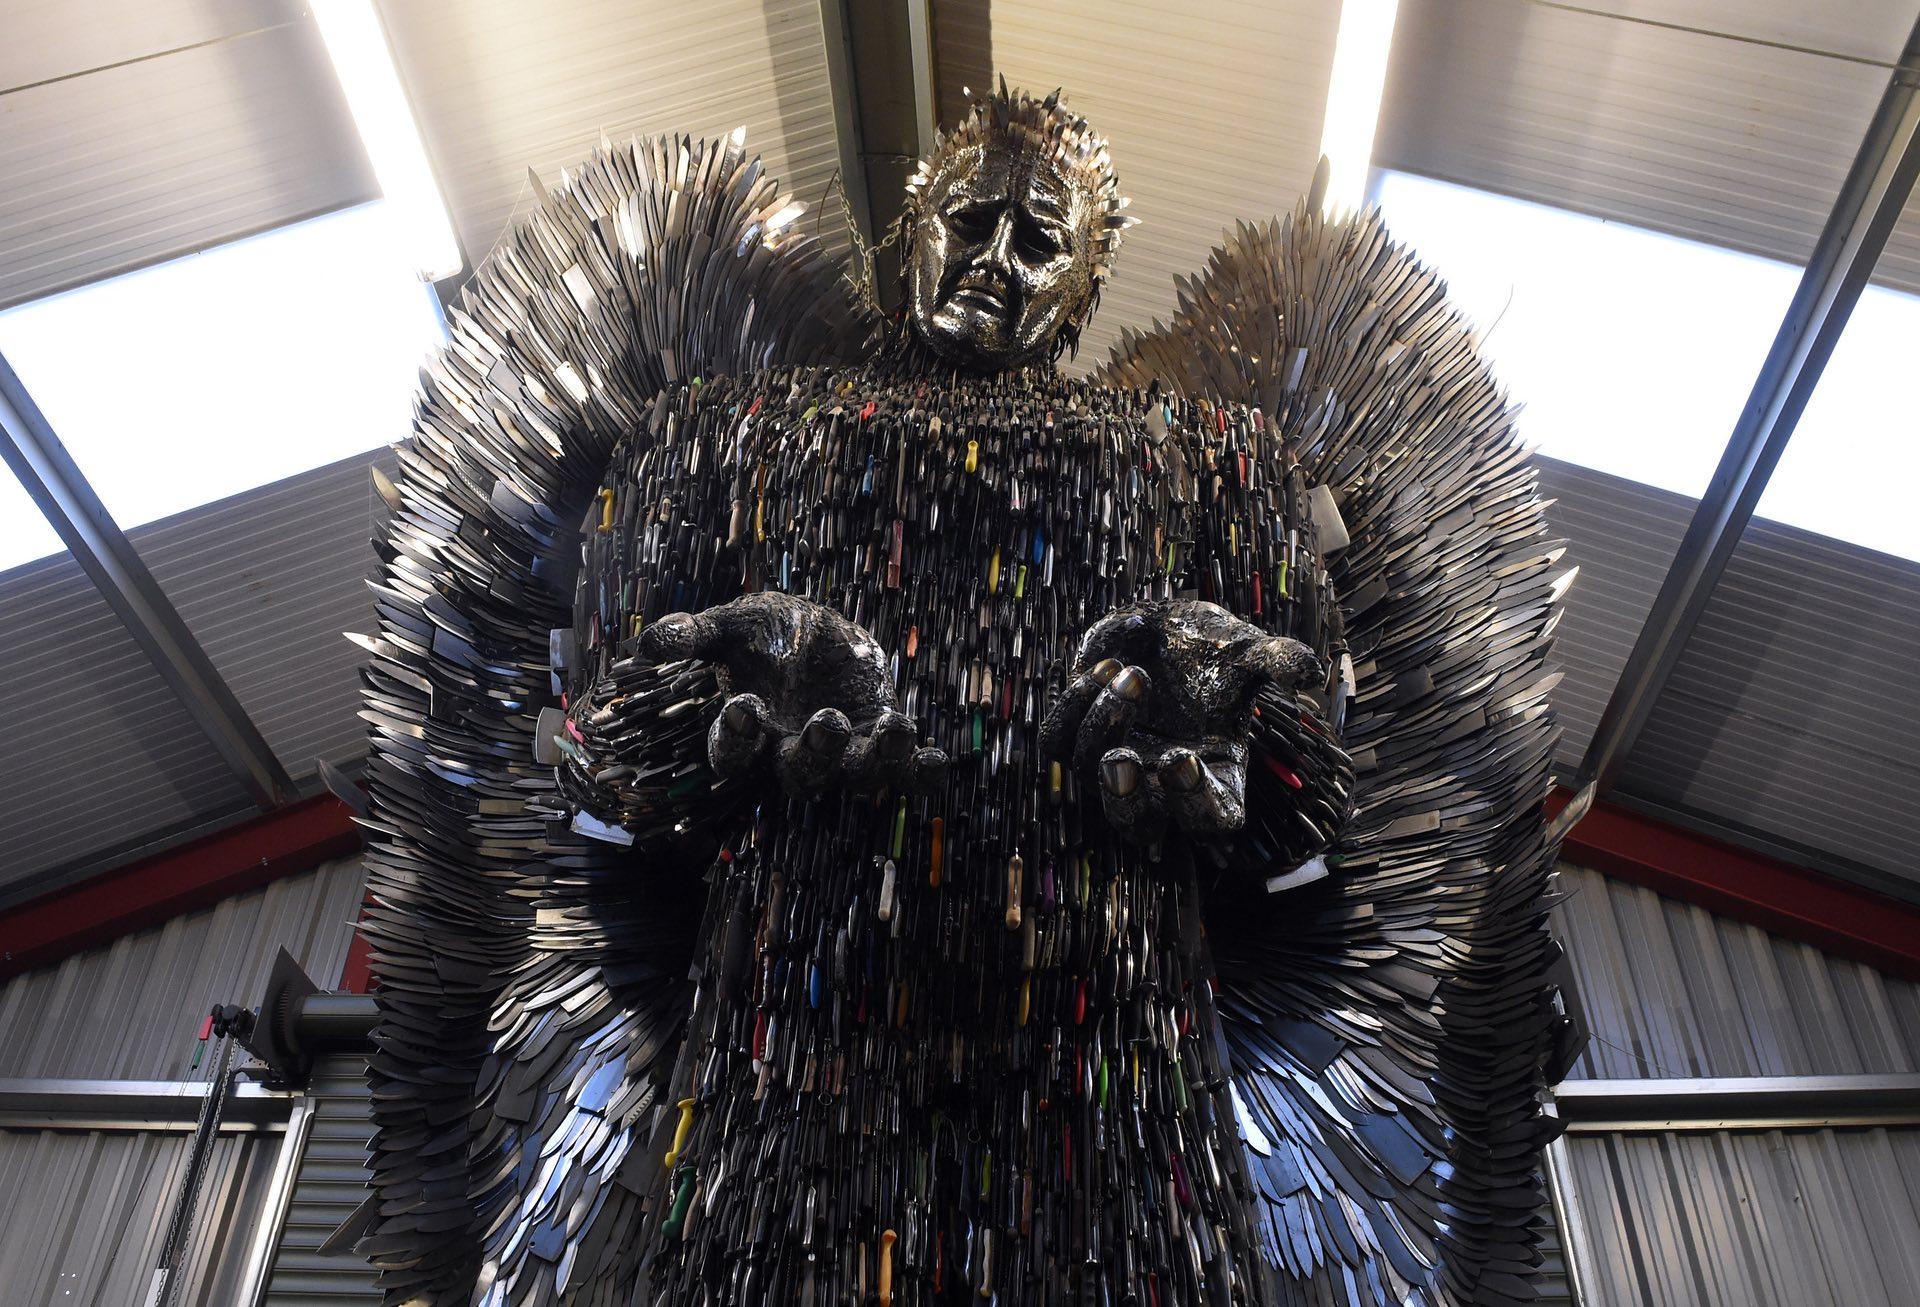 The ‘Knife Angel’ sculpture created with 100,000 knives collected by 41 police forces across the country at the British Ironwork Centre